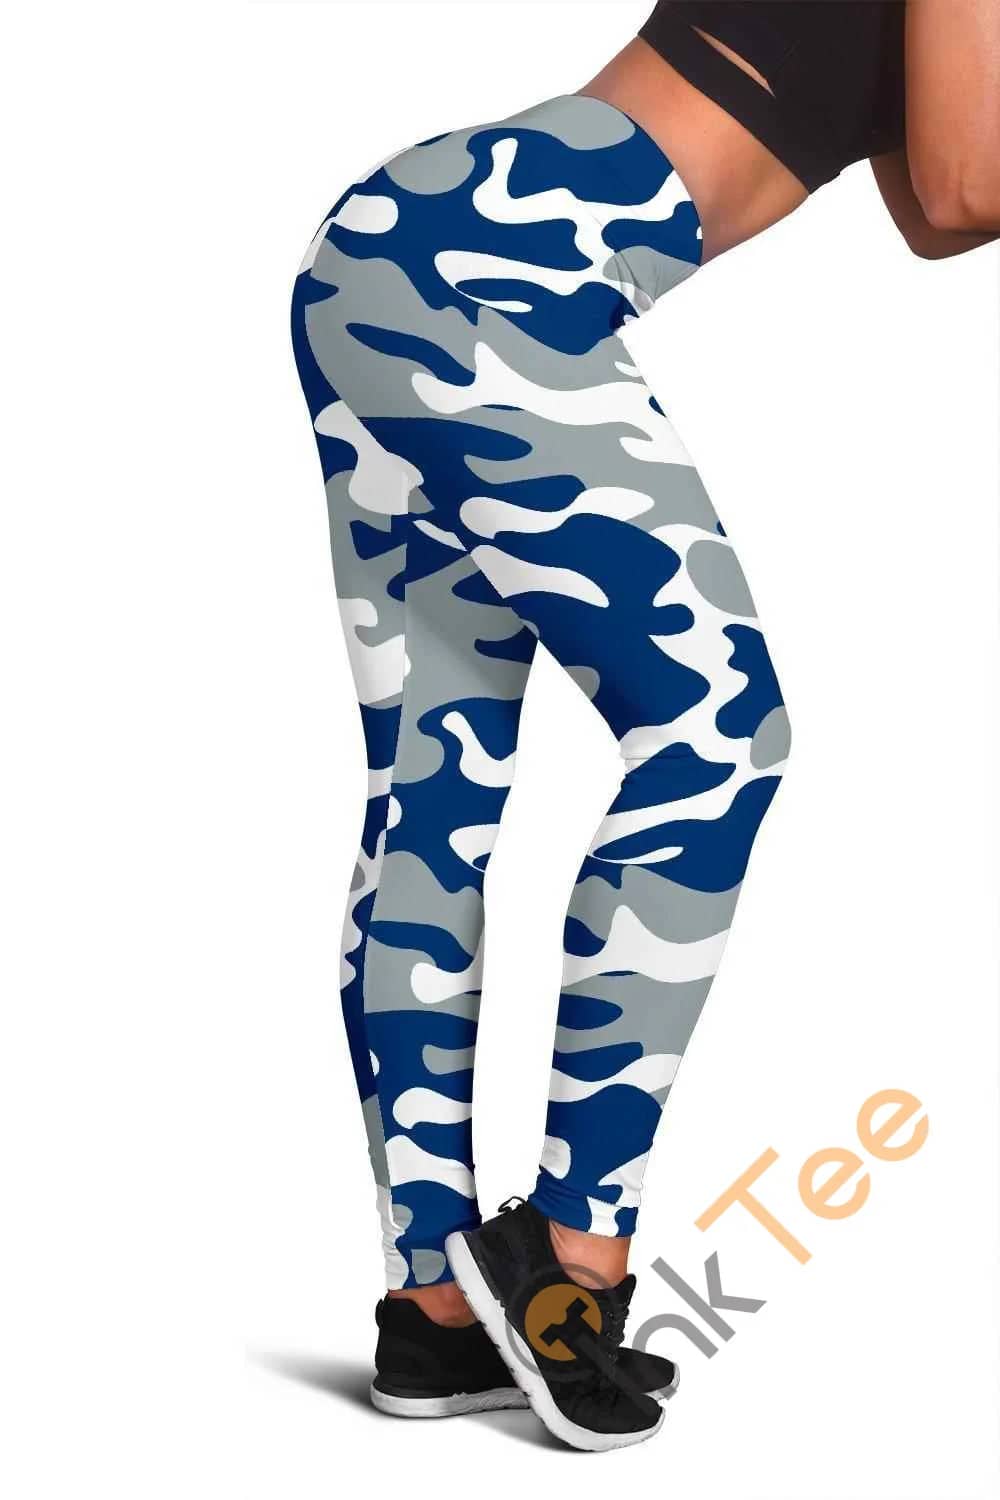 Indianapolis Colts Inspired Tru Camo 3D All Over Print For Yoga Fitness Fashion Women'S Leggings